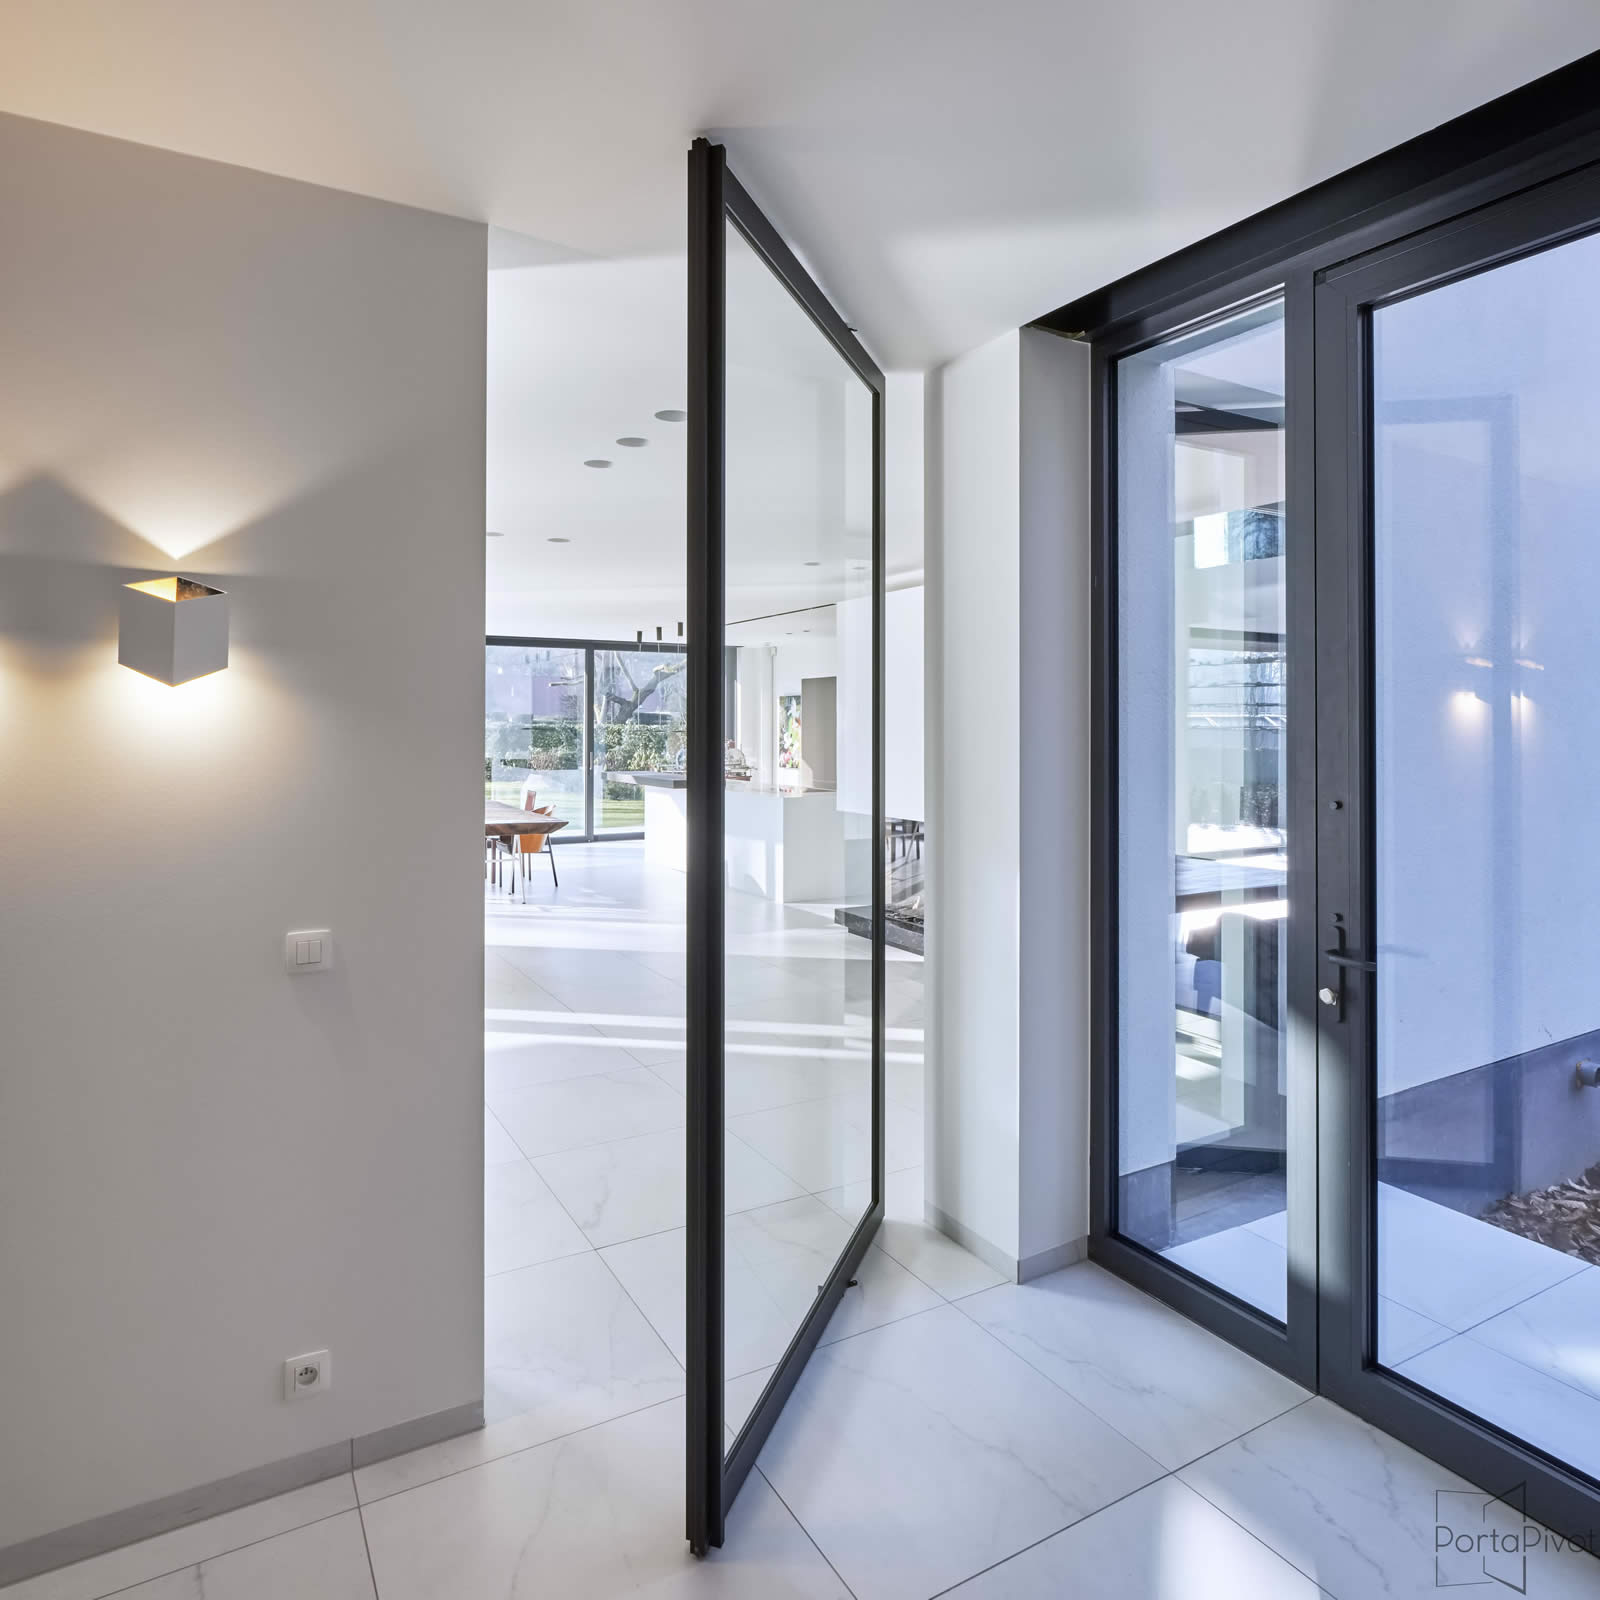 Slim-Framed Doors, Windows & Structural Glass | Minimal Frame Projects